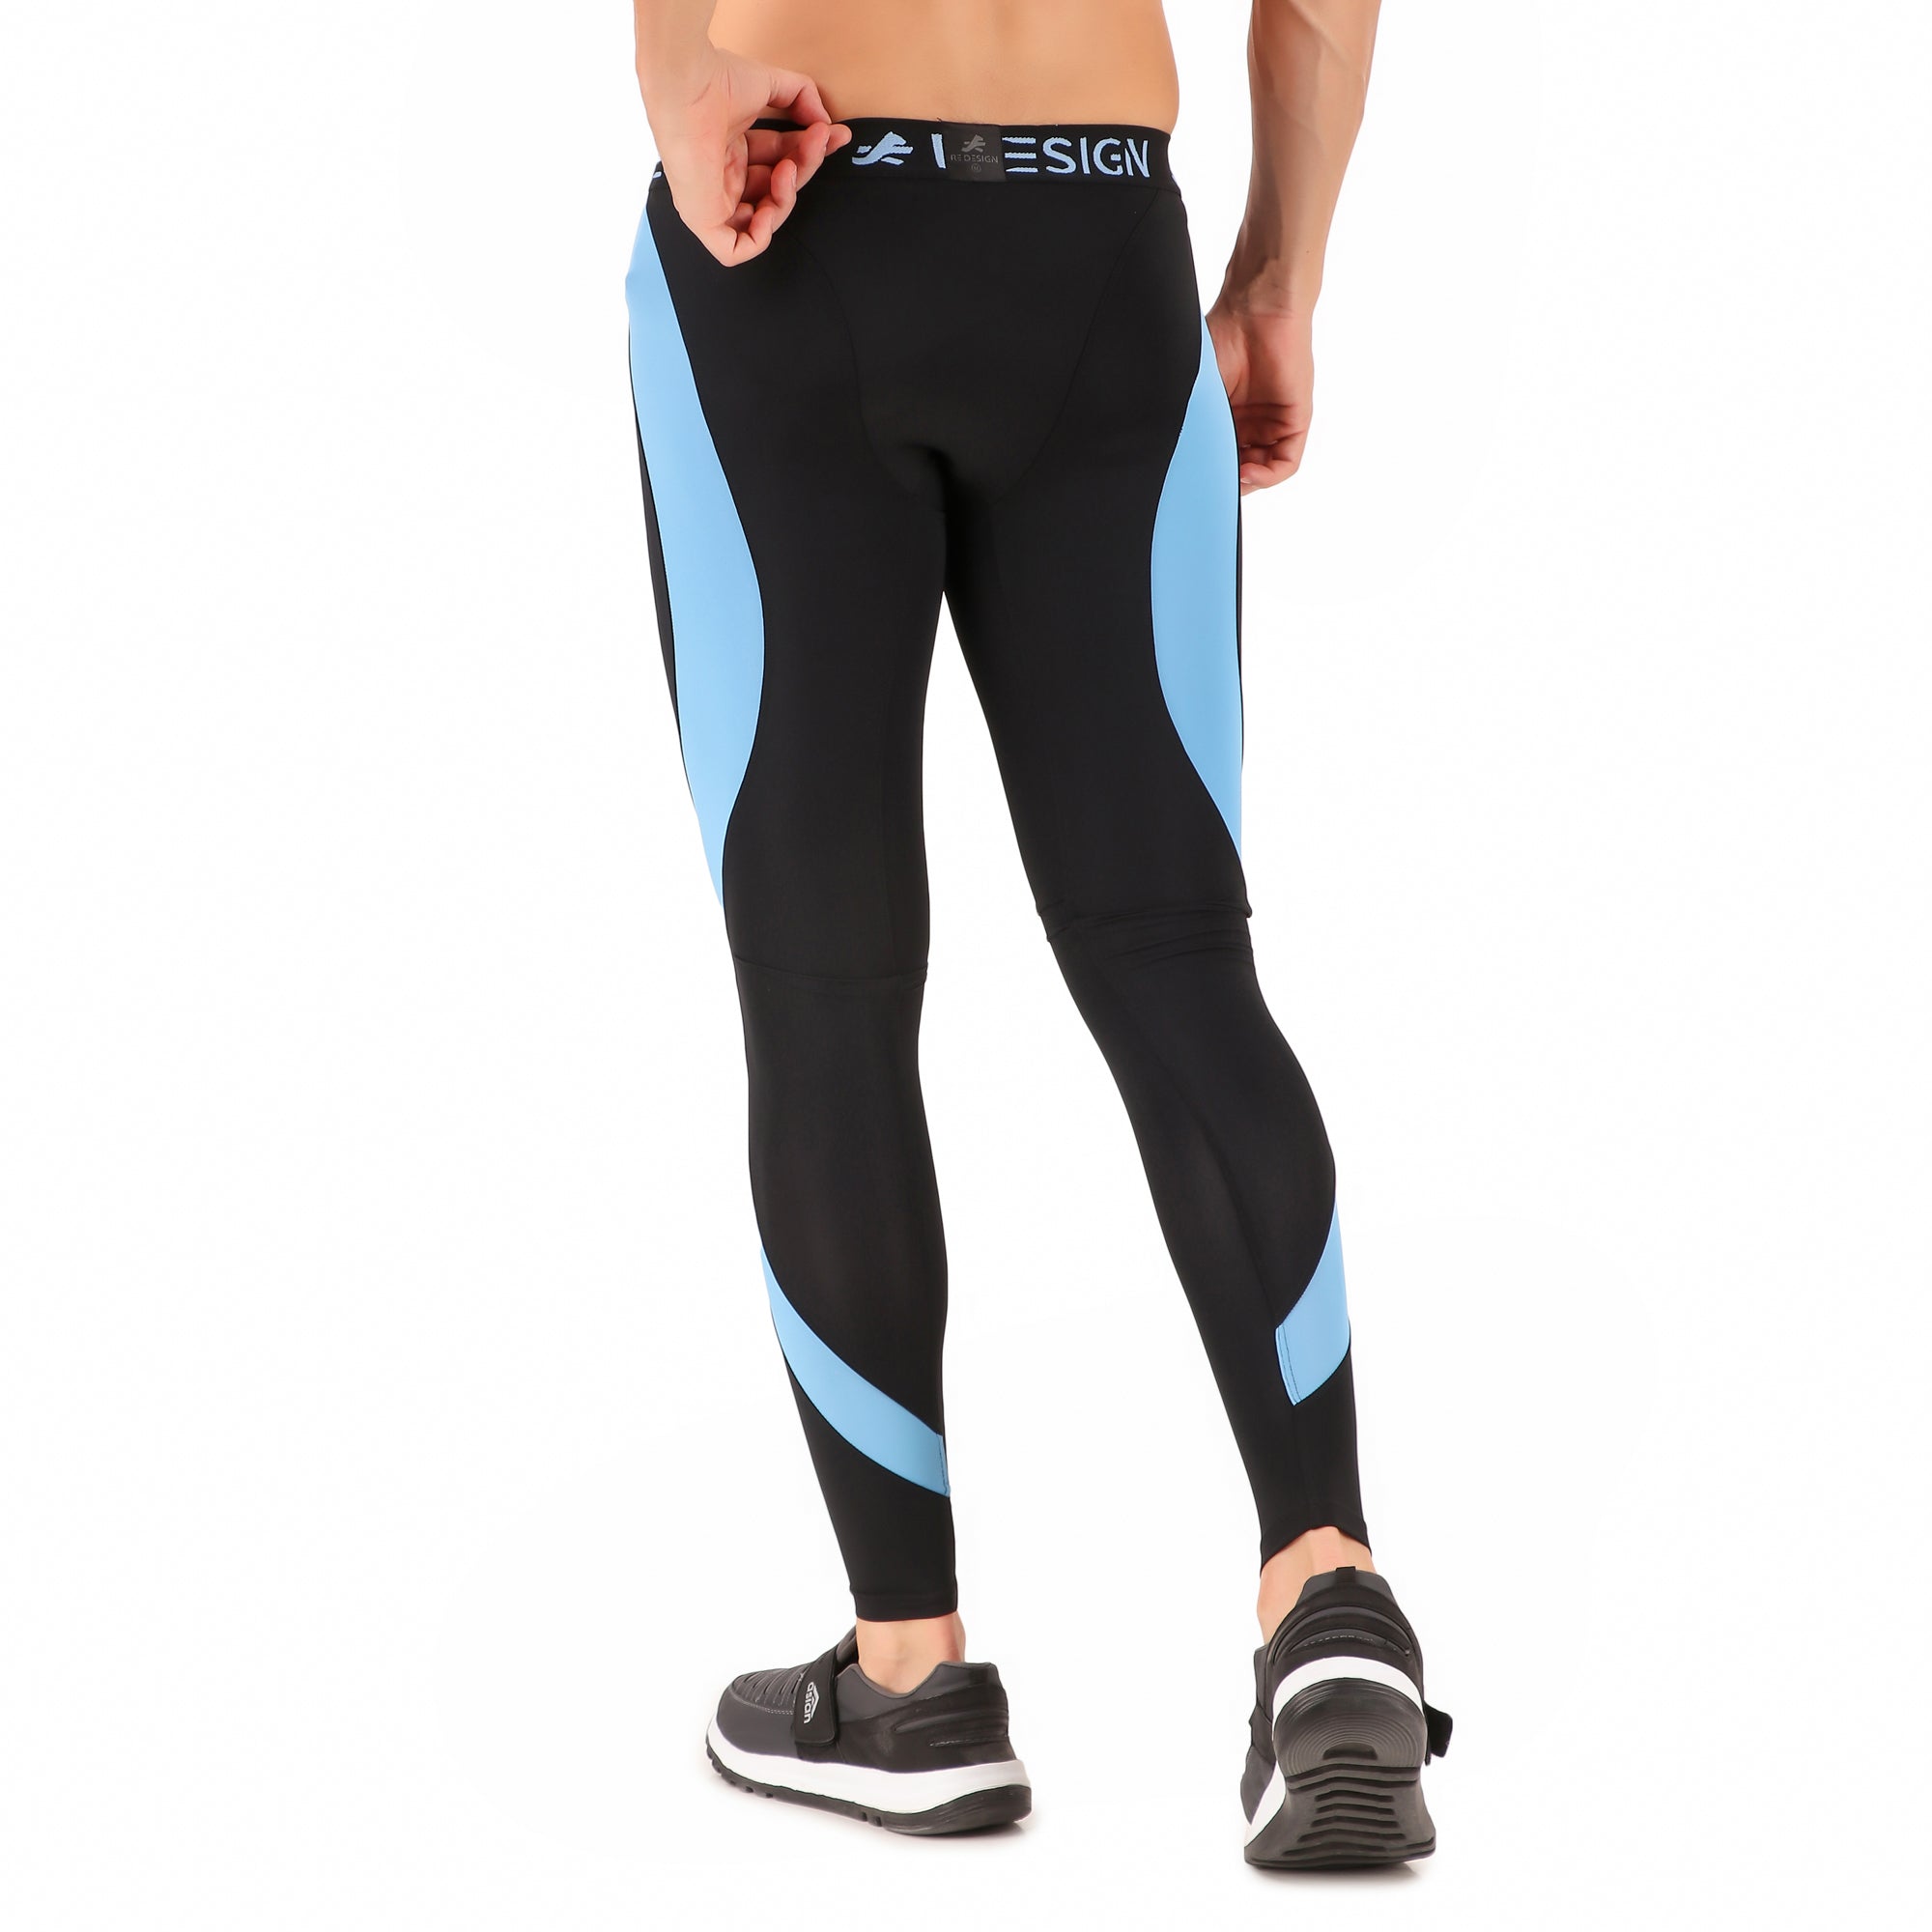 Nylon Compression Pant and Full Tights For Men (Sky Blue